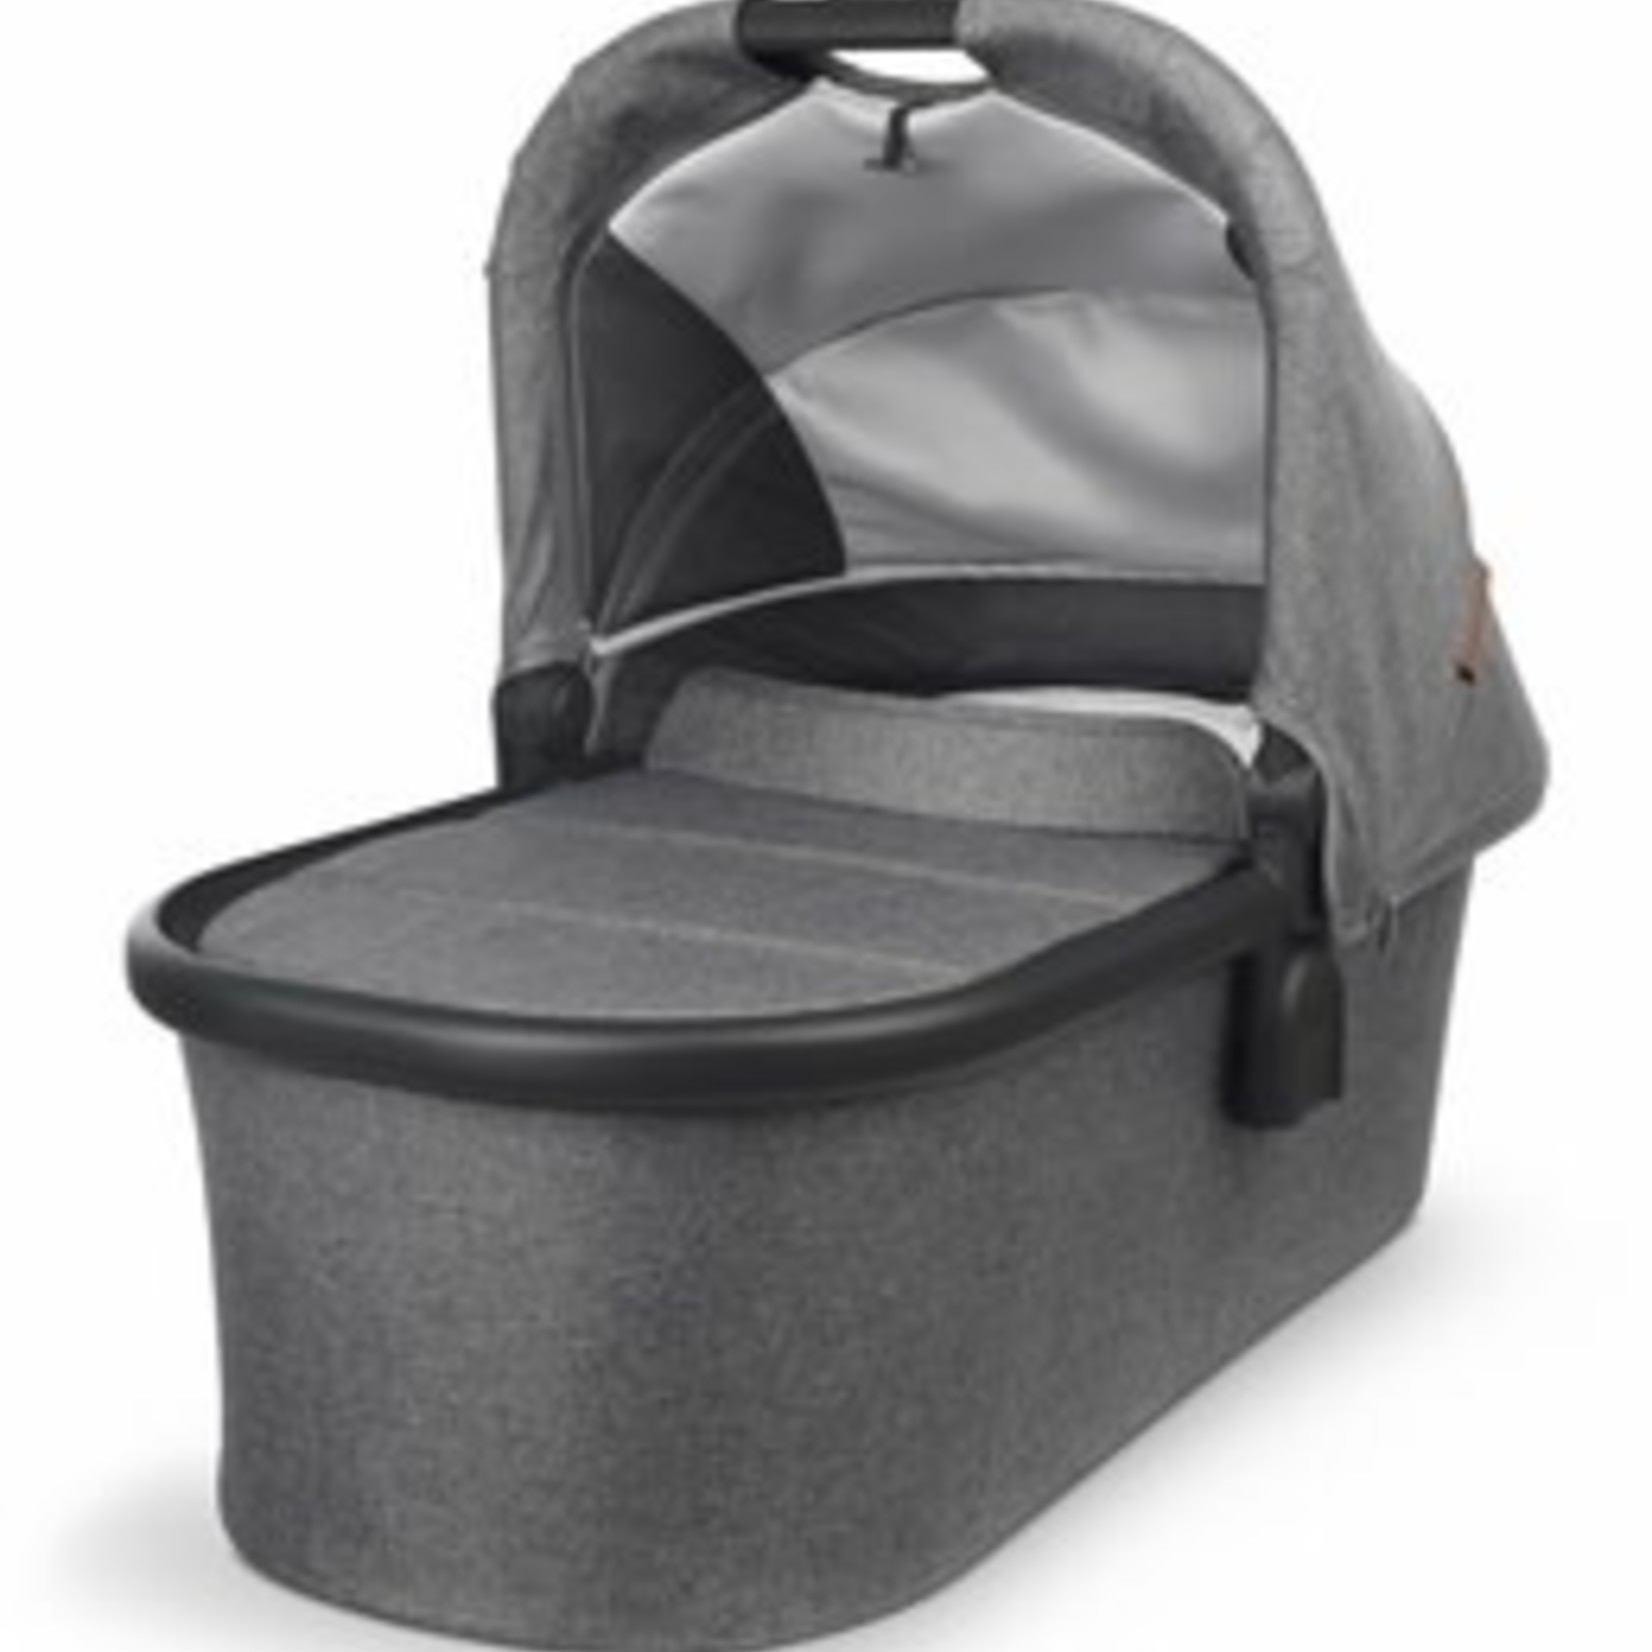 UPPAbaby Bassinet by UppaBaby